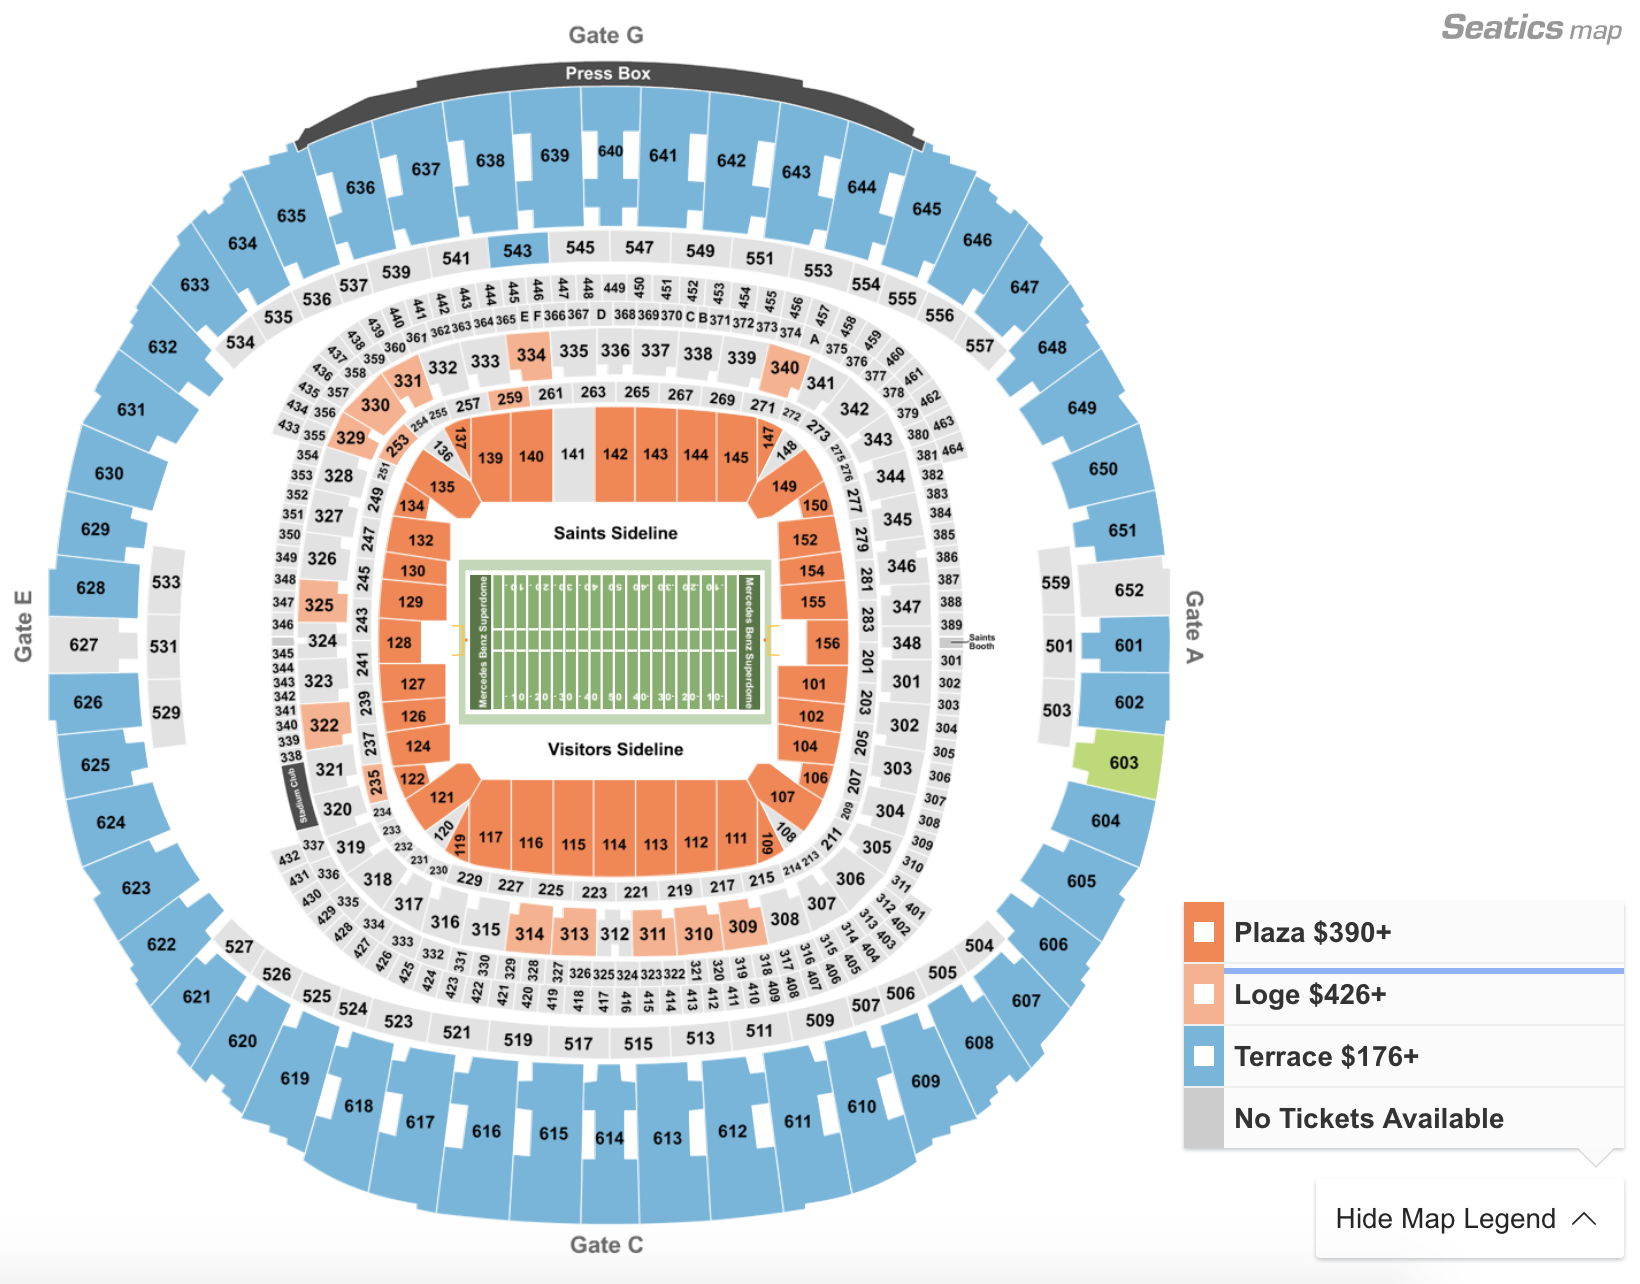 Mercedes Benz Superdome Seating Chart With Rows